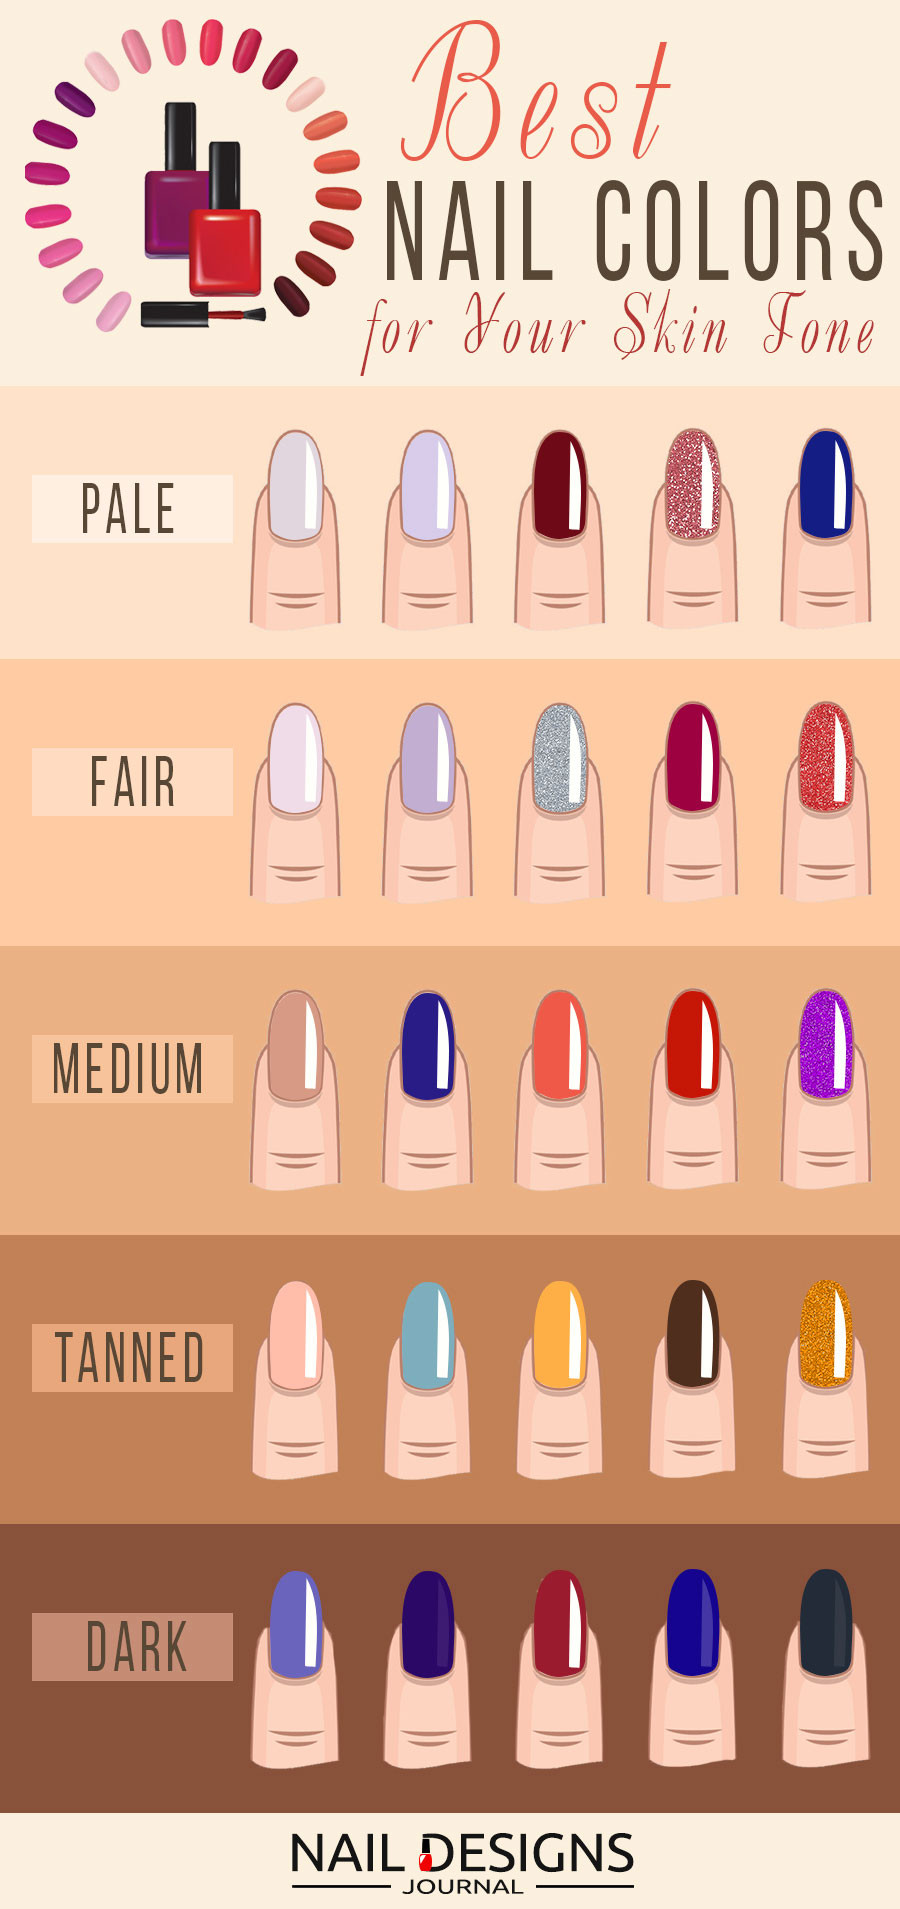 Best Nail Colors For Fair Skin
 30 Best Nail Colors For Your plexion